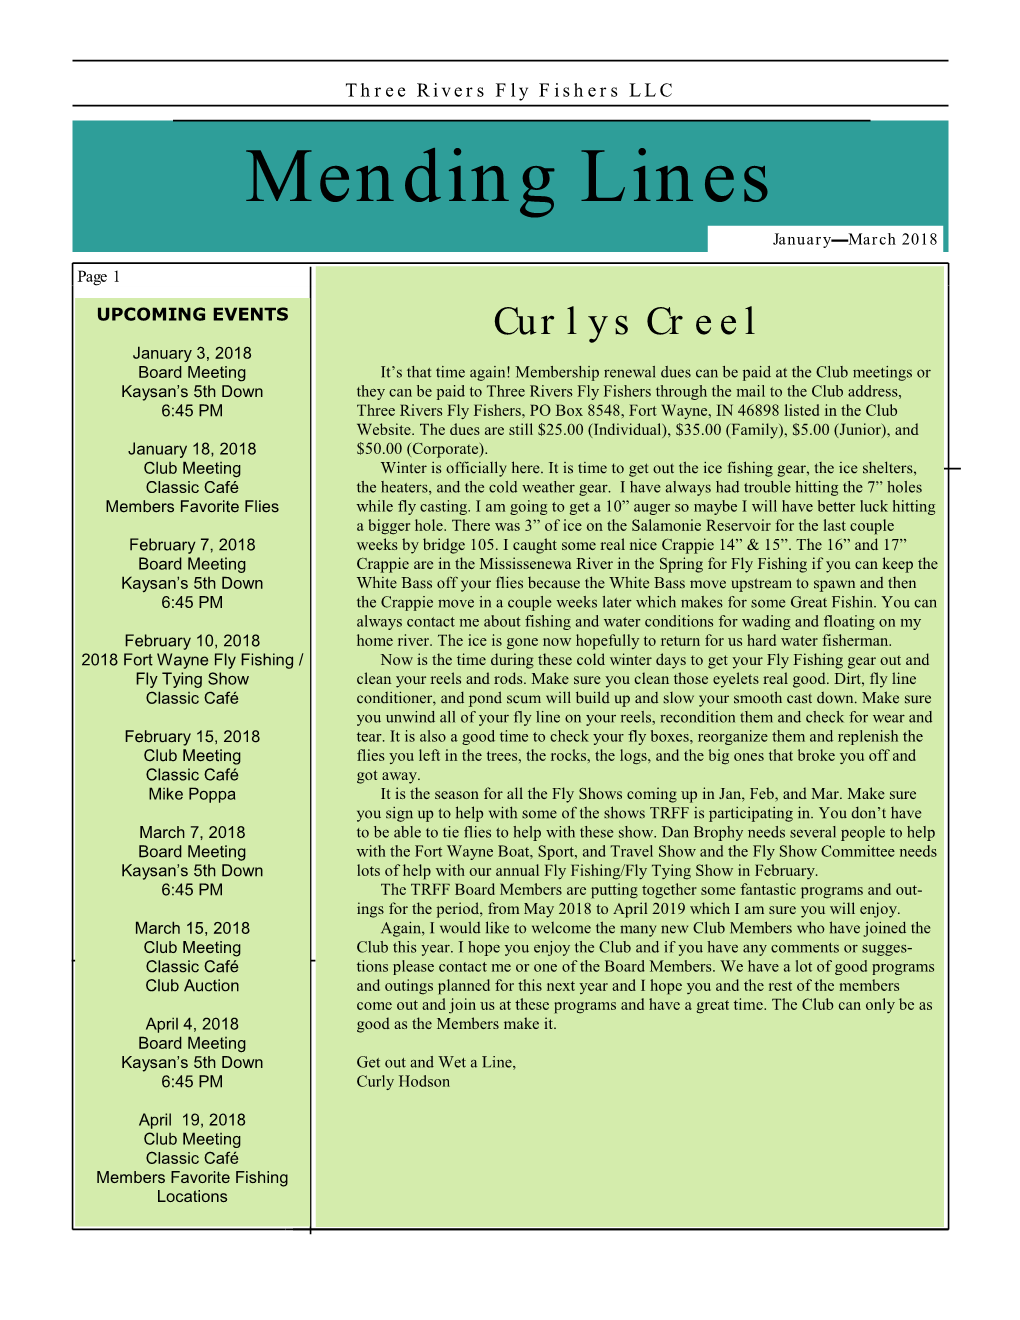 Mending Lines January—March 2018